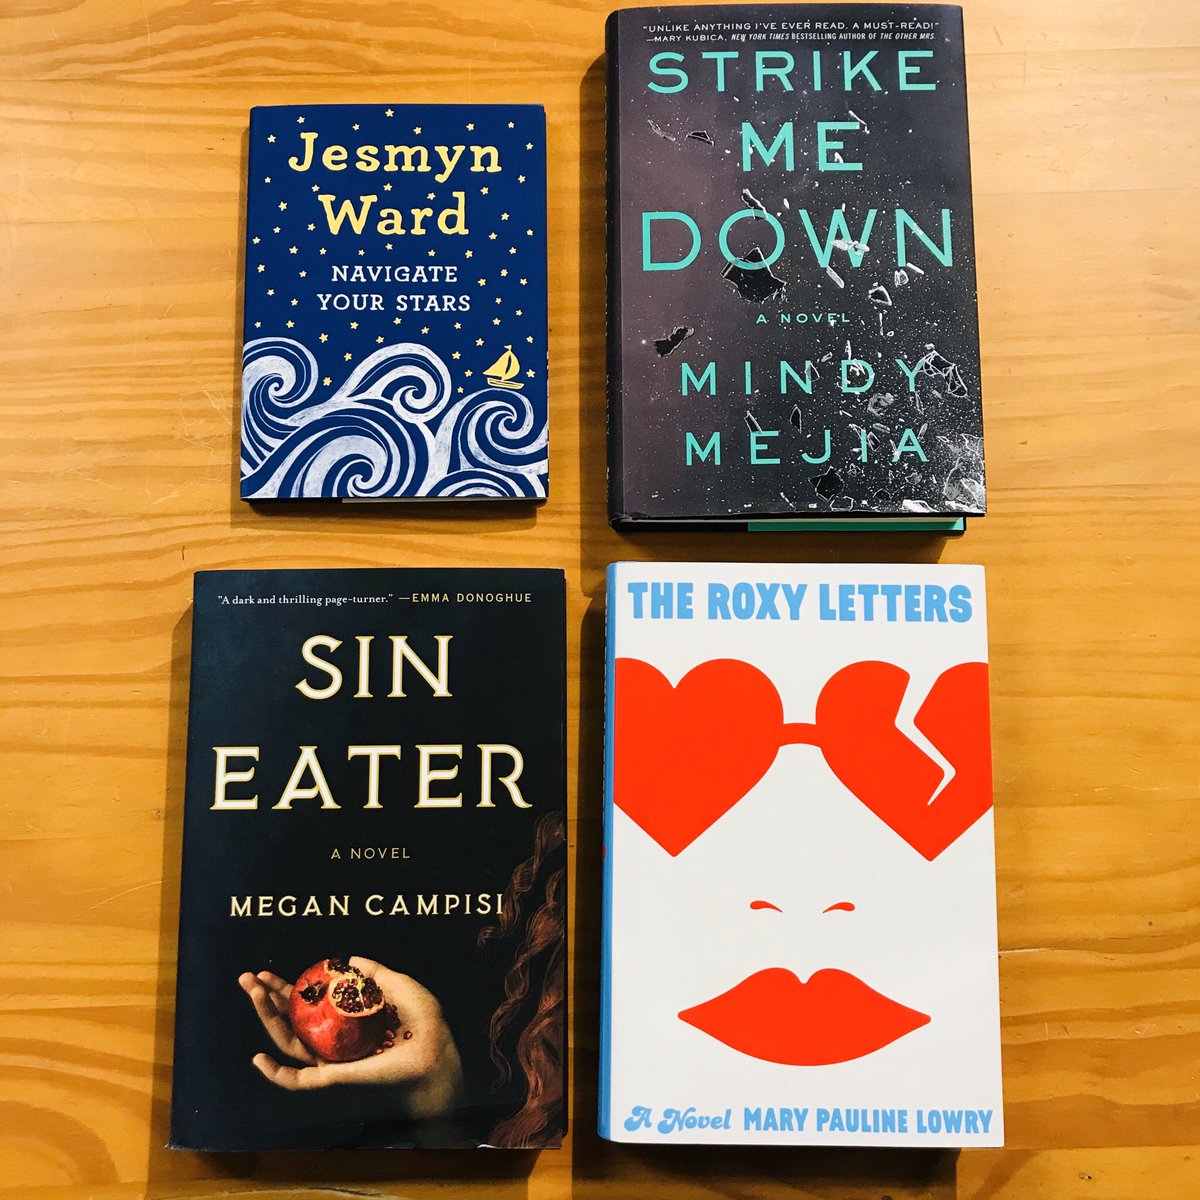 NAVIGATE YOUR STARS by  @jesmimi!STRIKE ME DOWN by  @MejiaWrites!SIN EATER by Megan Campisi! THE ROXY LETTERS by  @MaryPLowry!